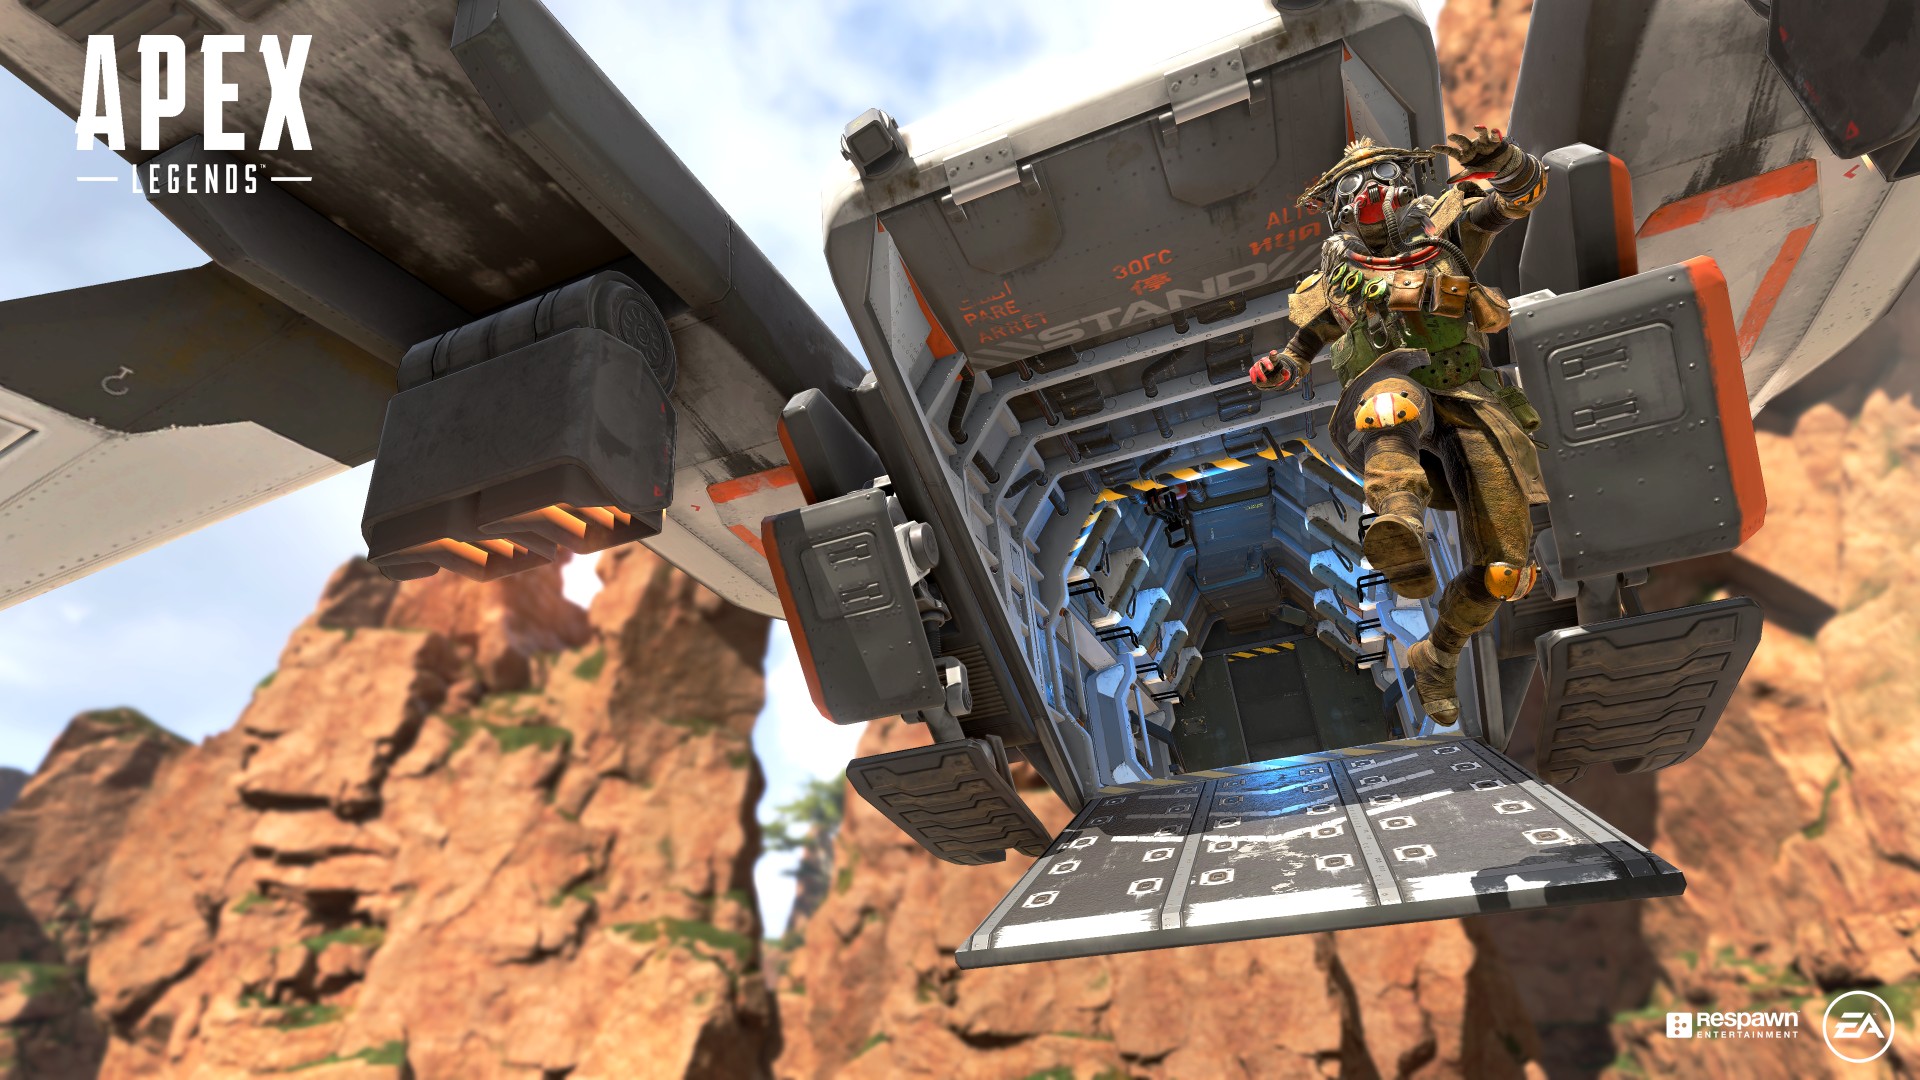 Play Apex Legends, a Free-to-Play Battle Royale from the Makers of Titanfall 2